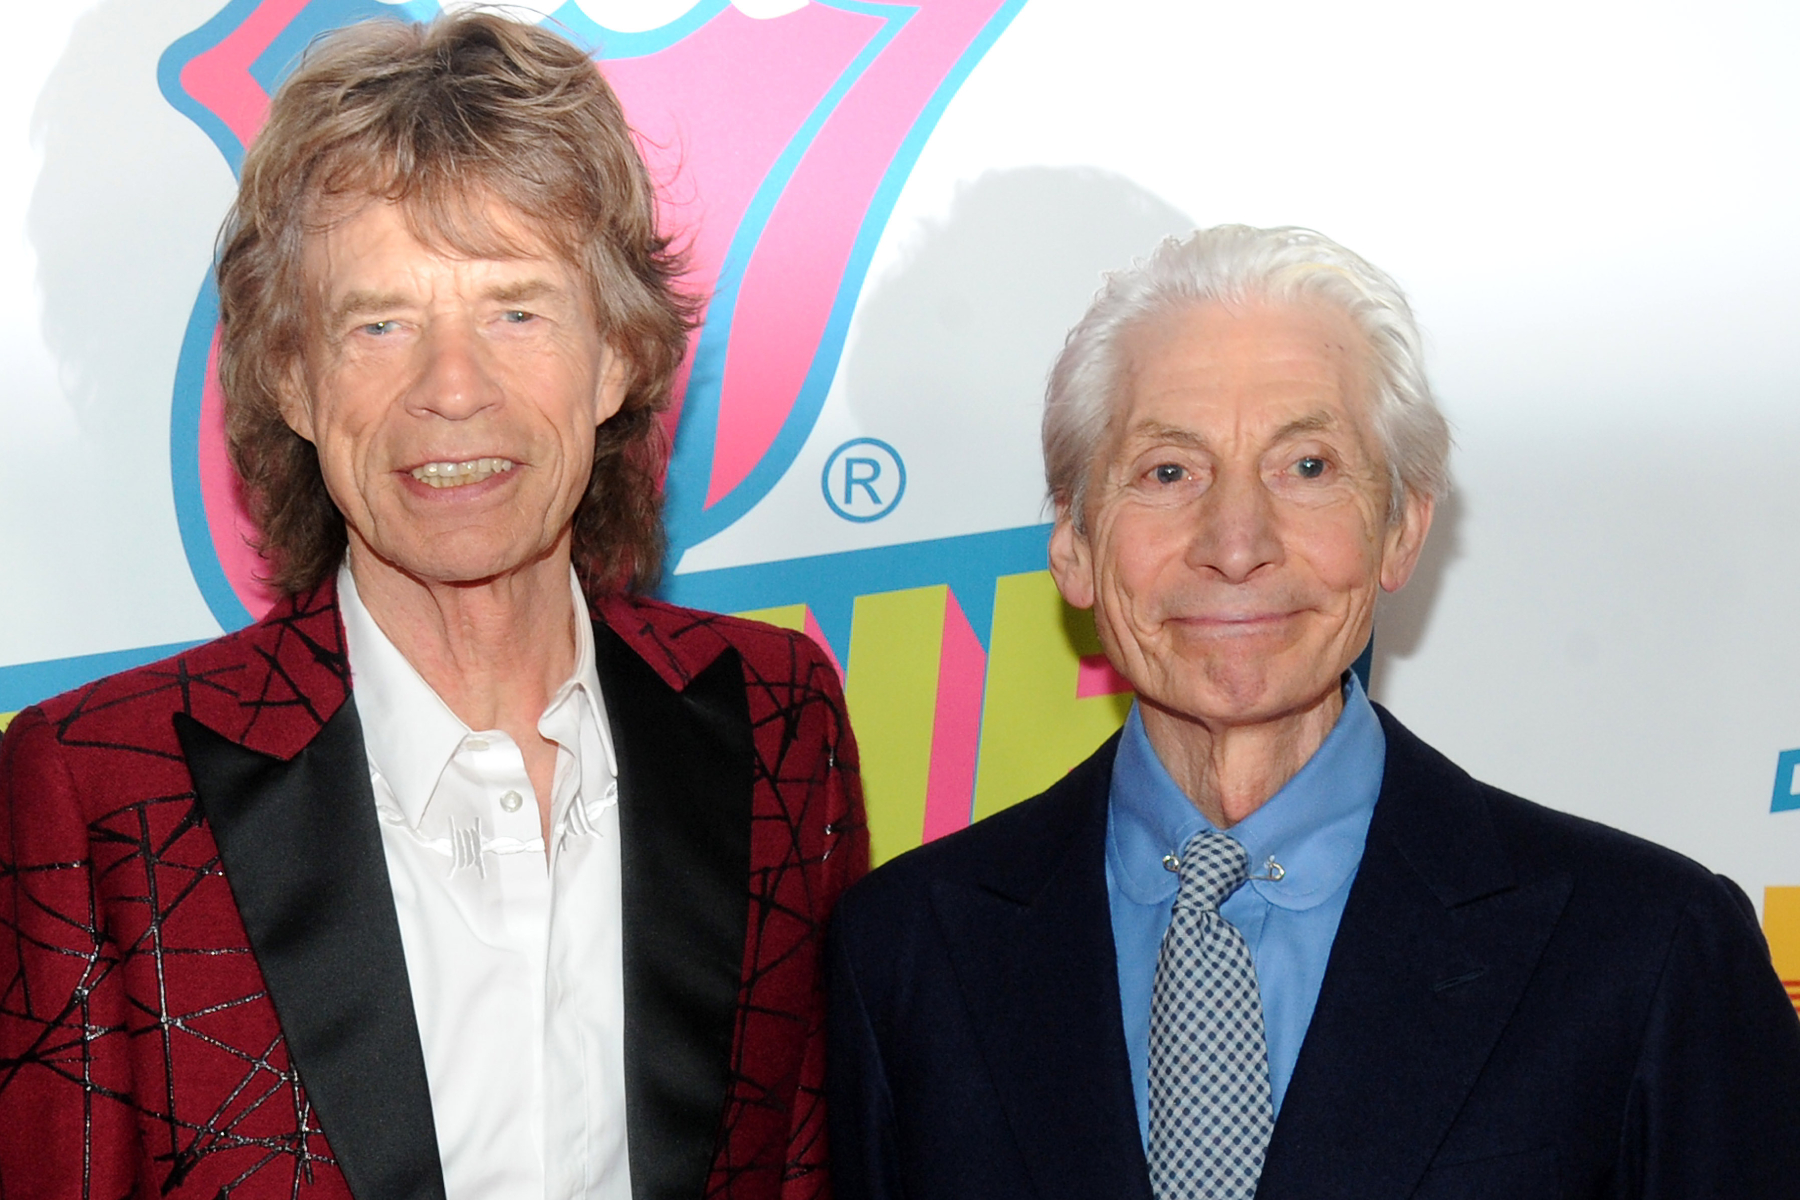 Mick Jagger Honors Stones ‘Heartbeat’ Charlie Watts on ‘Howard Stern’